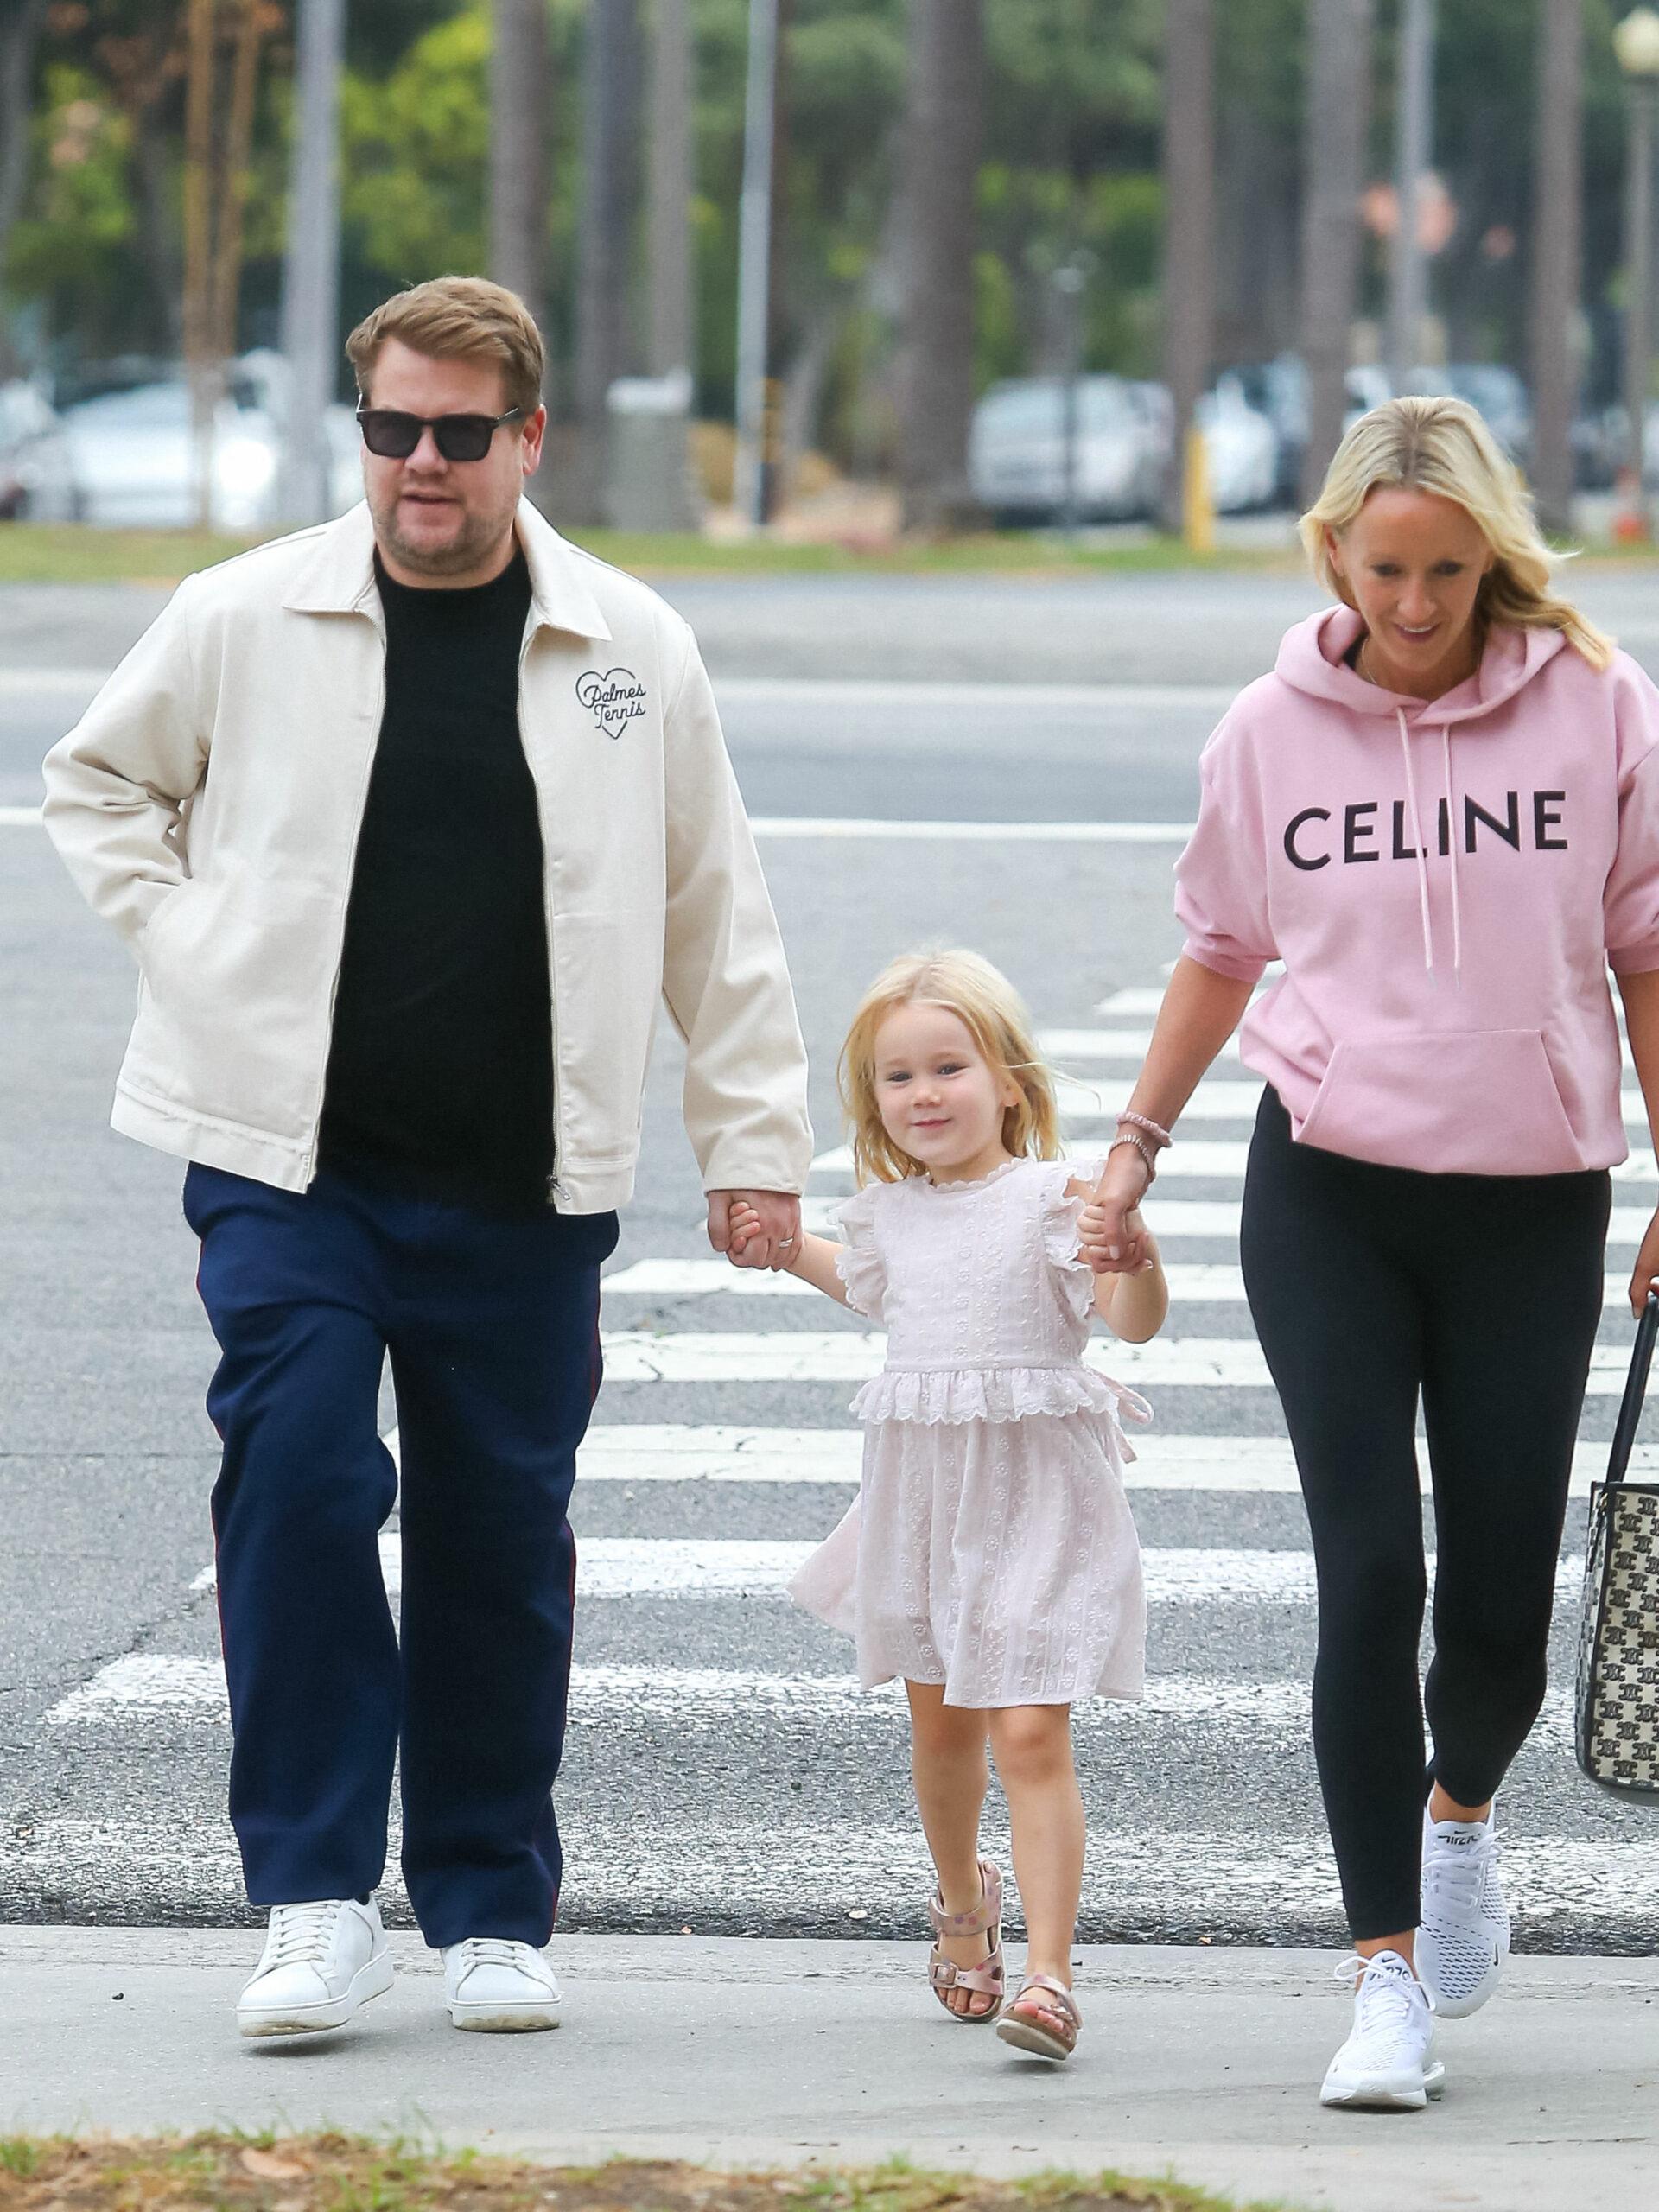 James Corden daughter Charlotte Corden and spouse Julia Carey runs errands in West Hollywood